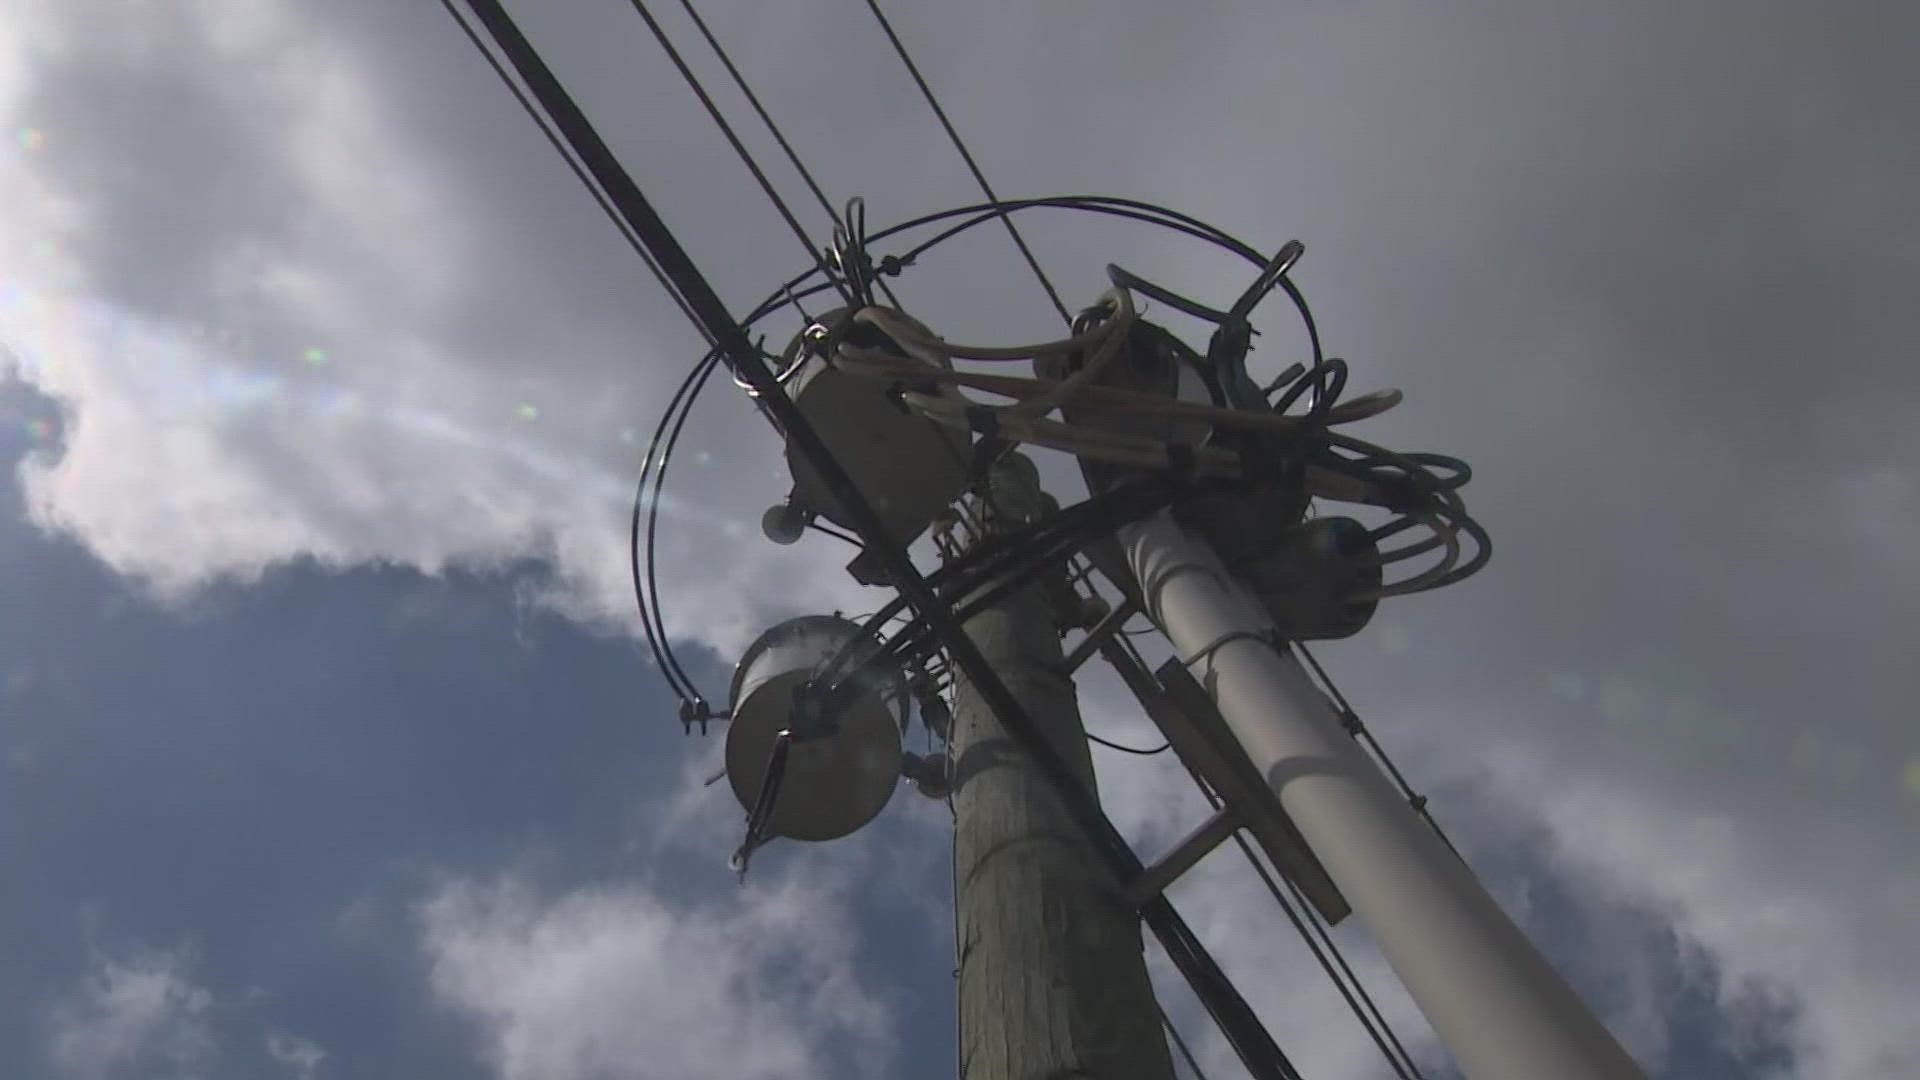 Energy experts are warning of a strain on the power grid this weekend across the state of Texas.